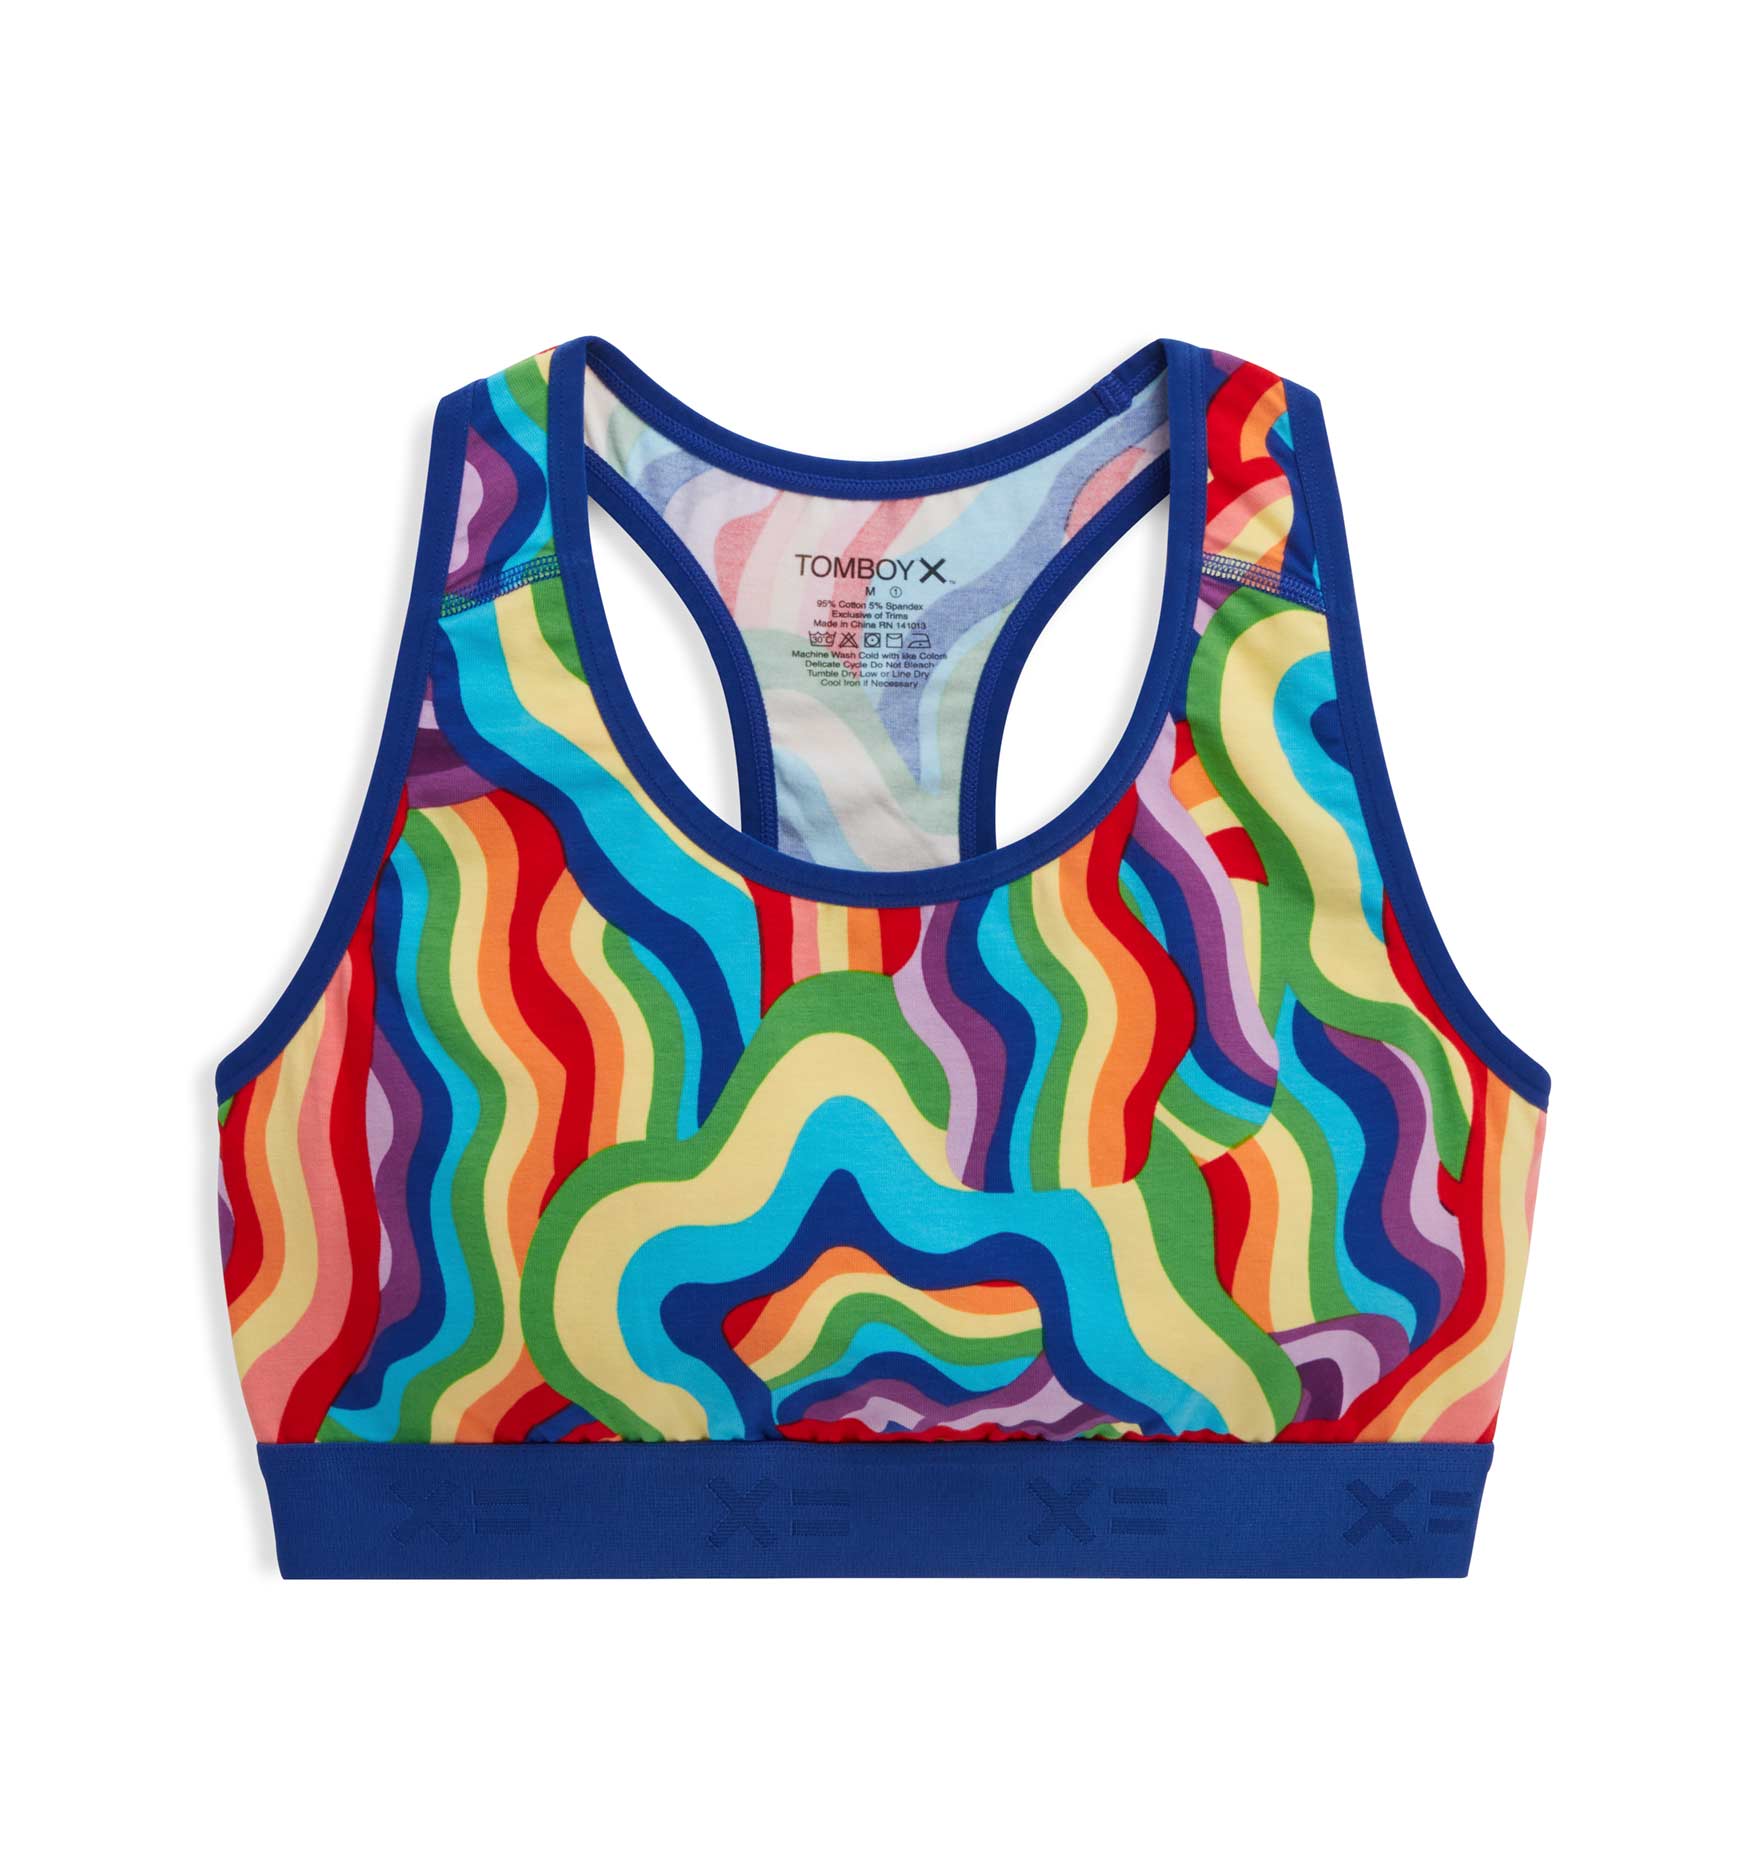 New Print: A Swirling Rainbow - TomboyX